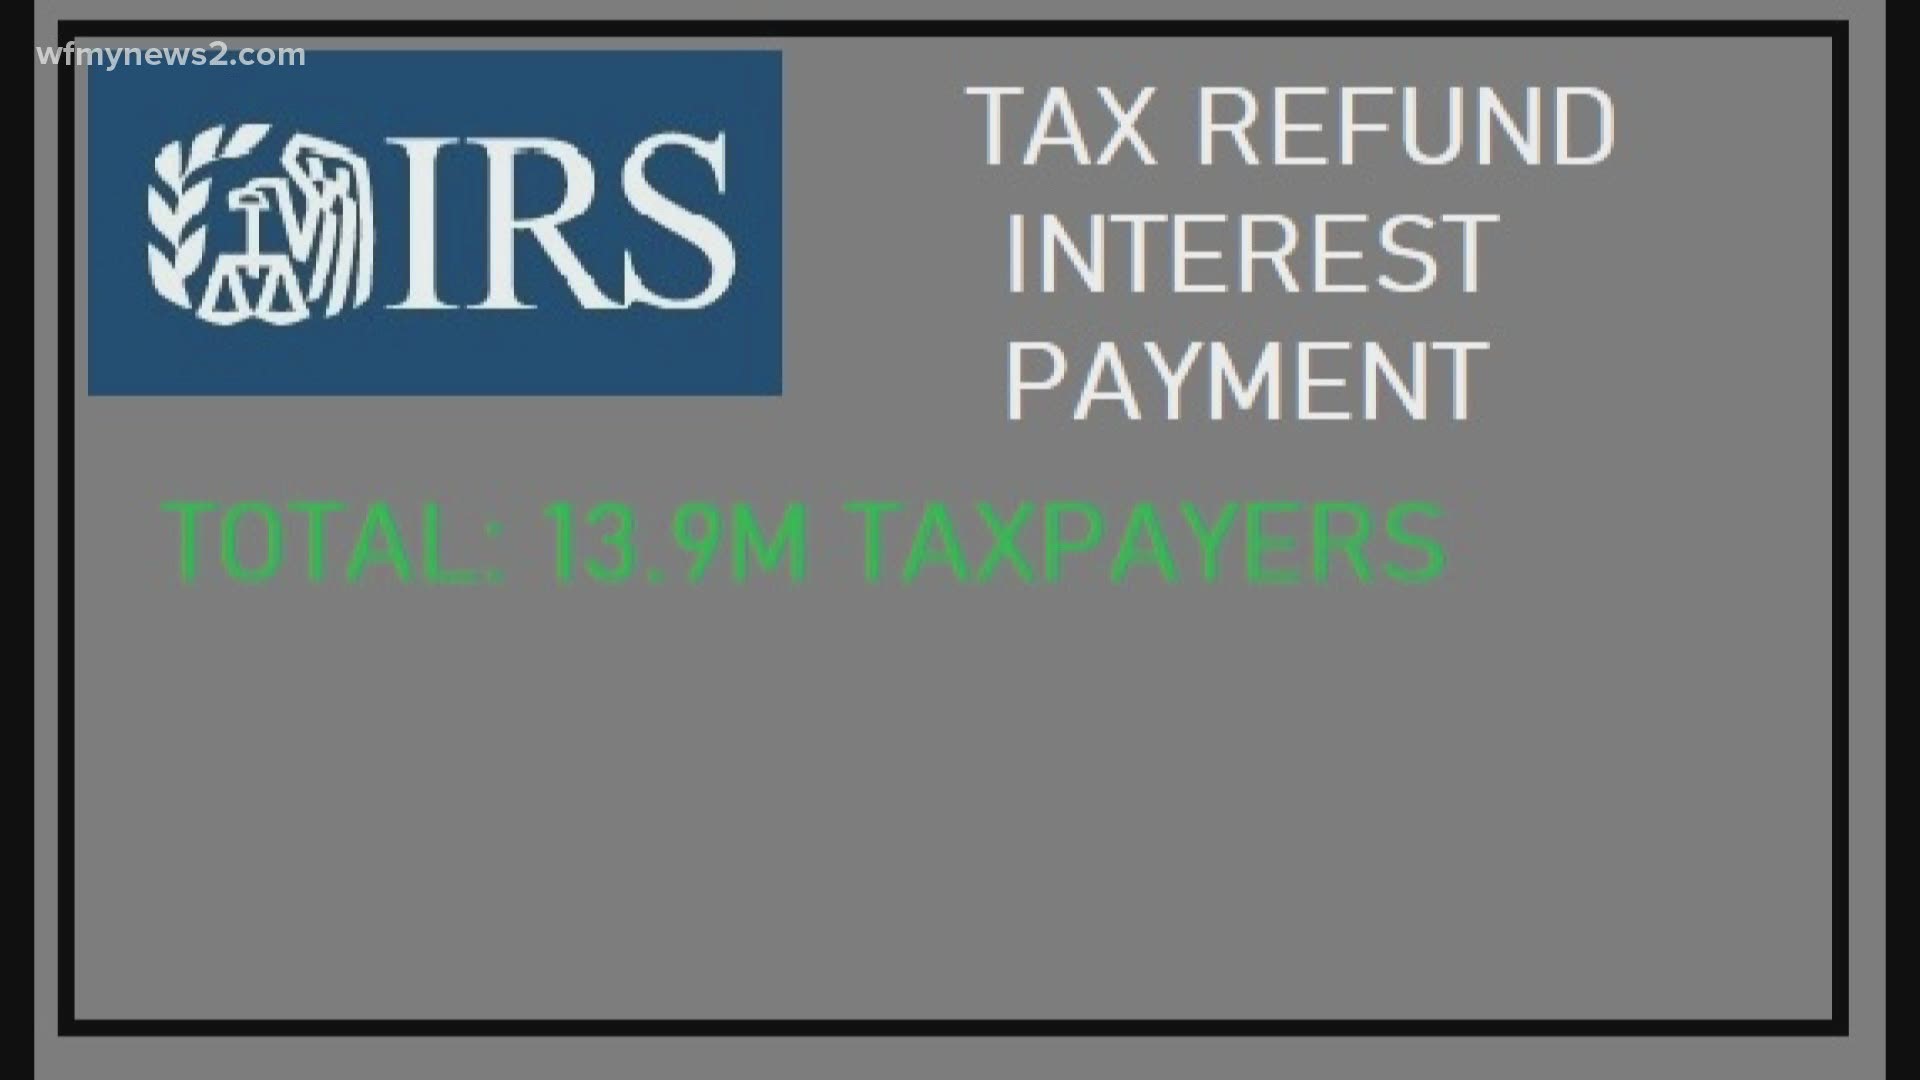 You qualify for an interest payment if you received or will receive a tax refund. You must also have already filed between April 15 - July 15 of this year.